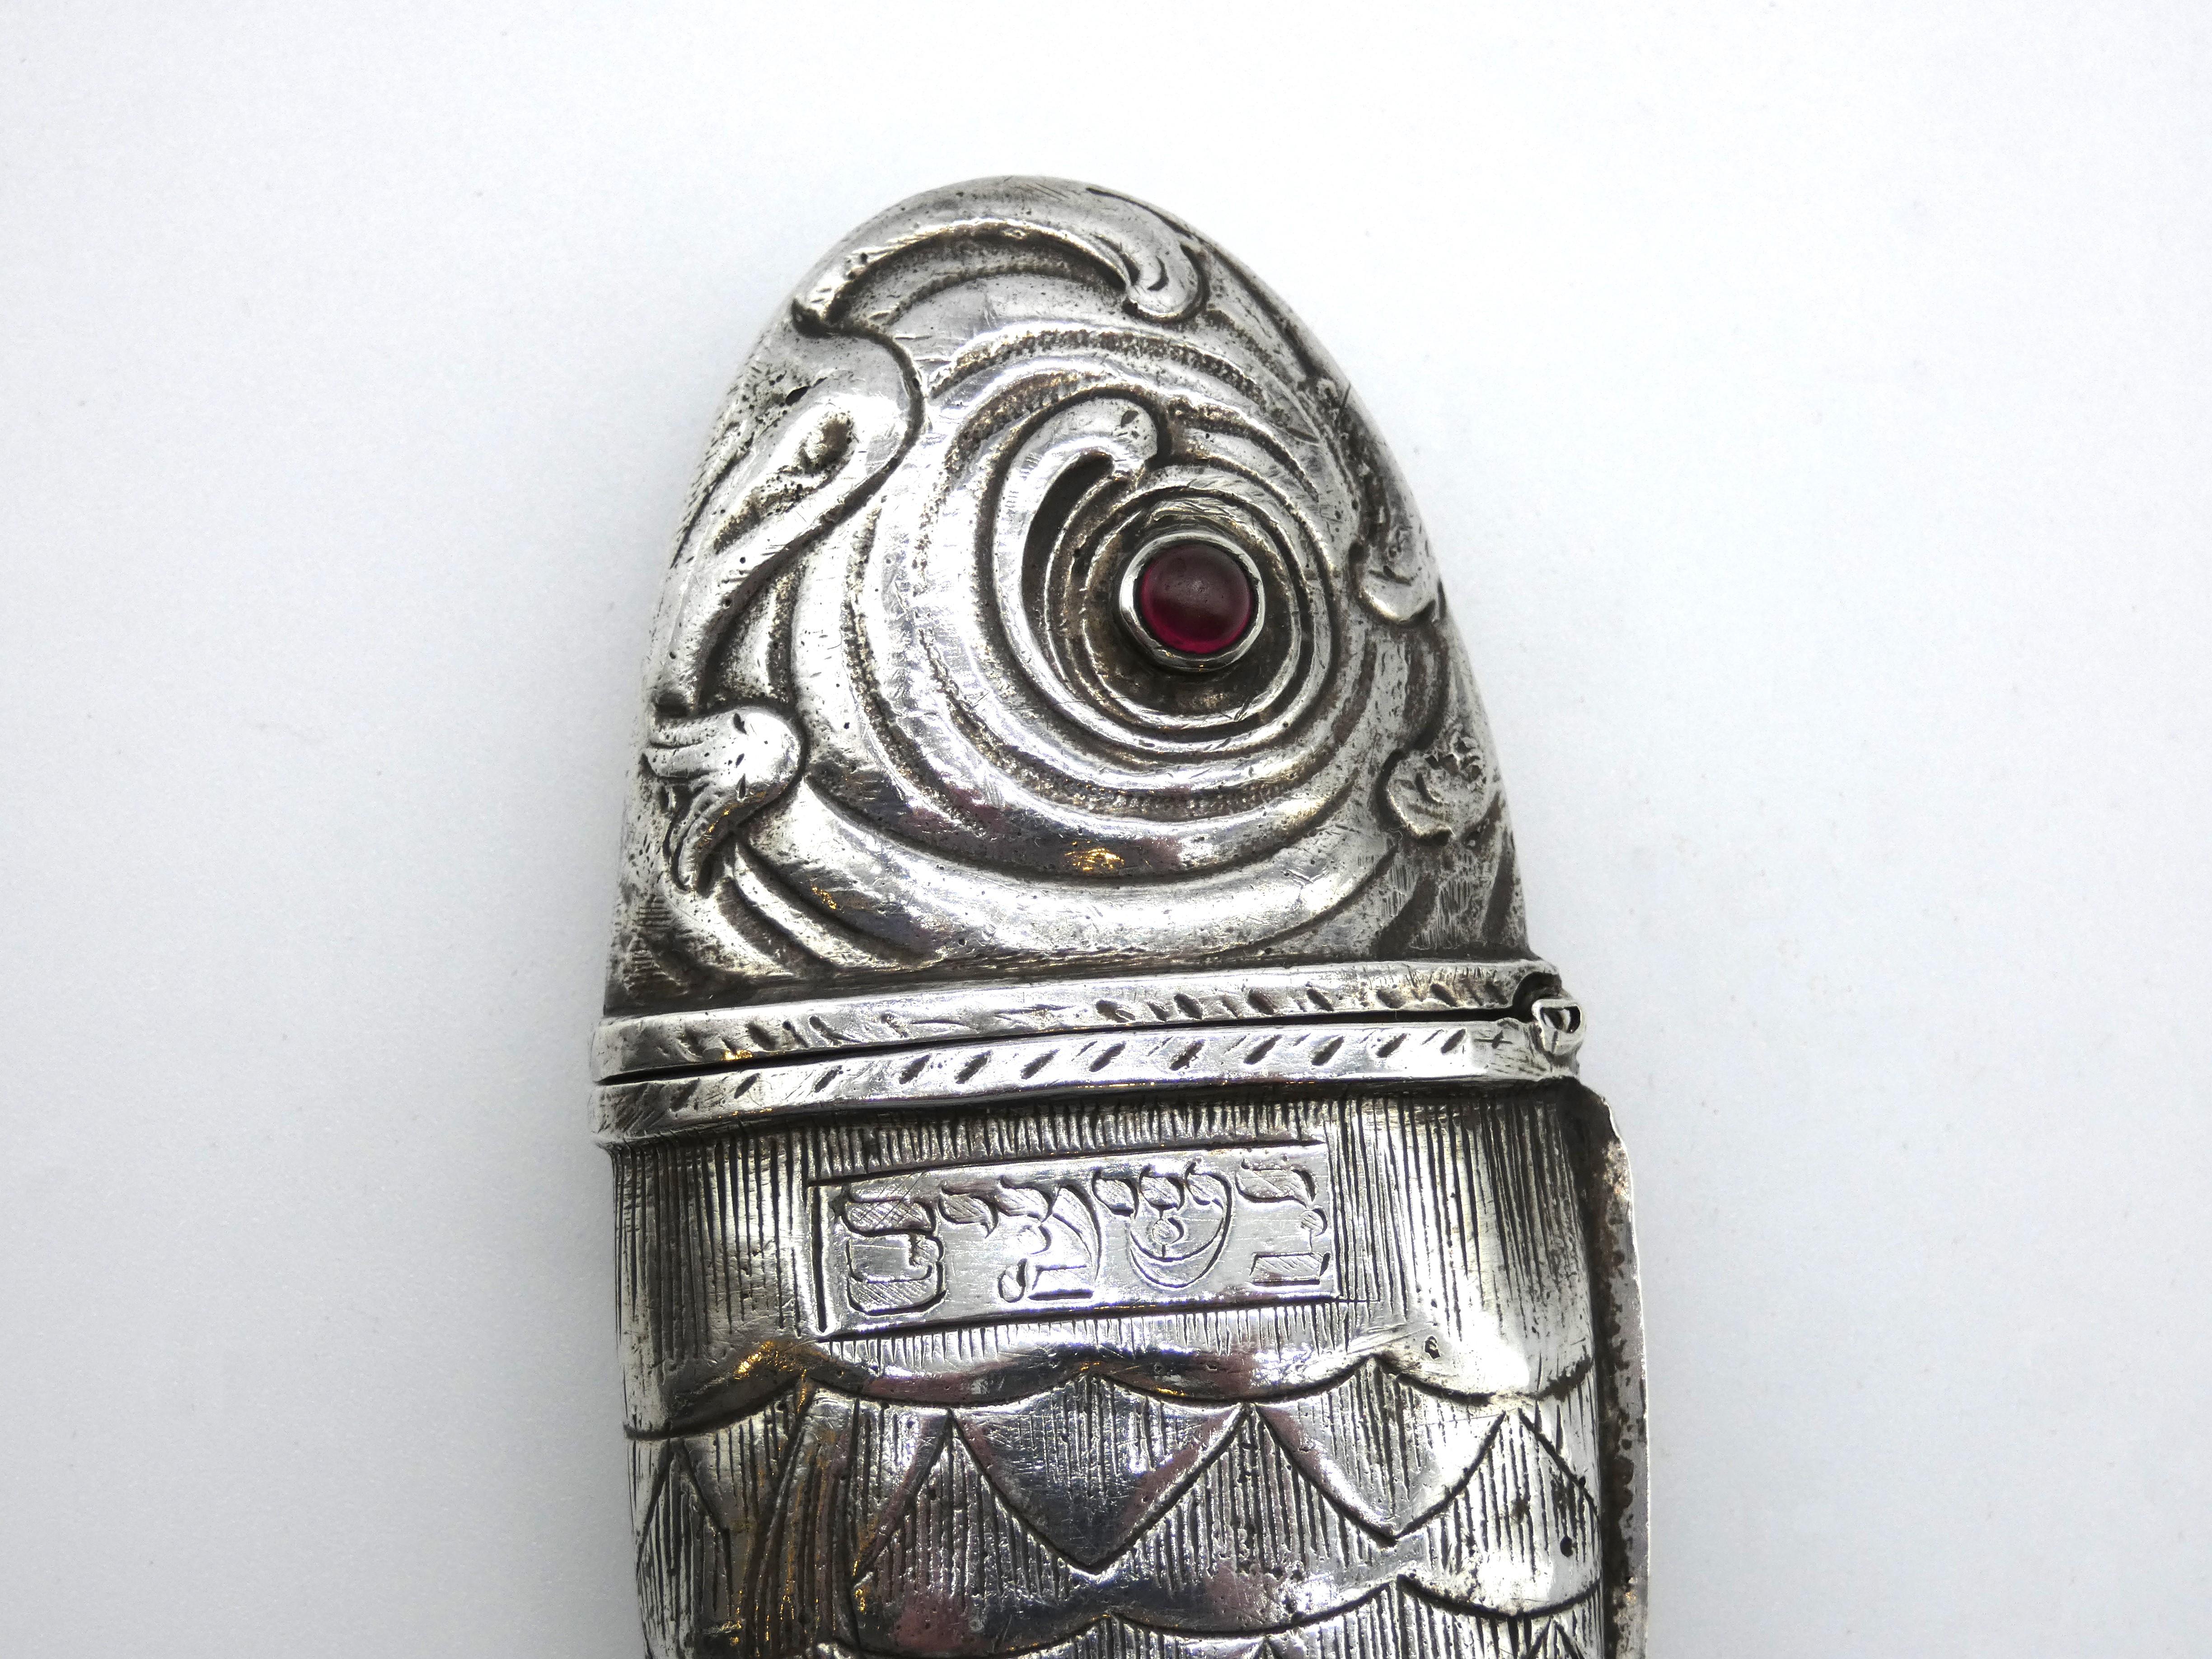 Head of spice container is designed in an oncoming wave pattern with two ruby colored gemstone eyes. Hinge set at neck for easy opening to refill spices. Decorated with elegant moving scales along the body. Marked at tailfin. Hebrew inscription